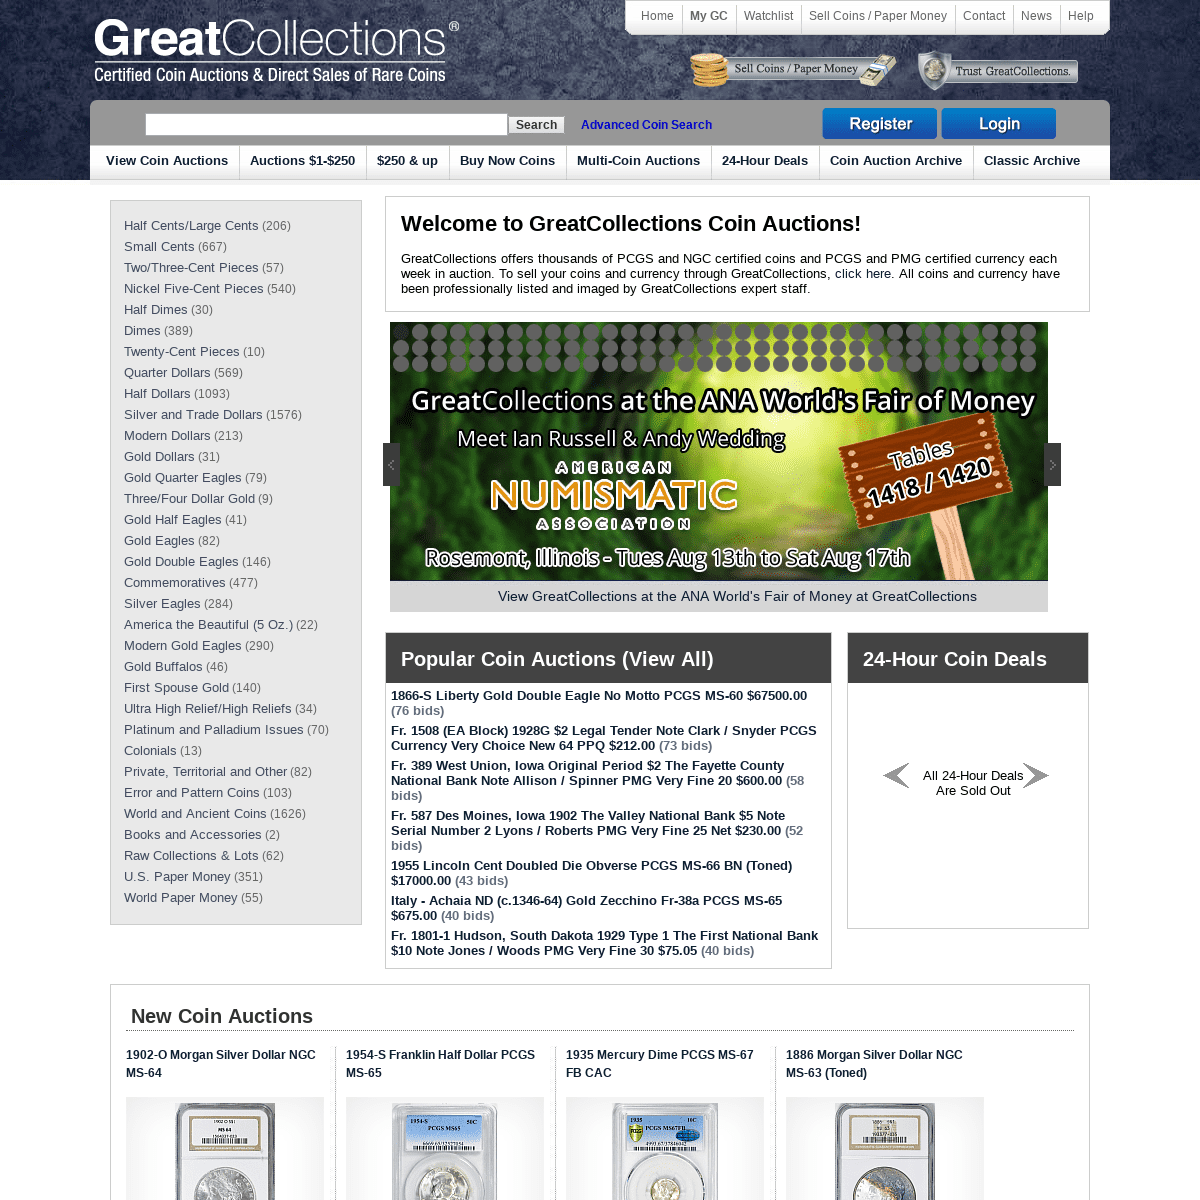 A complete backup of greatcollections.com